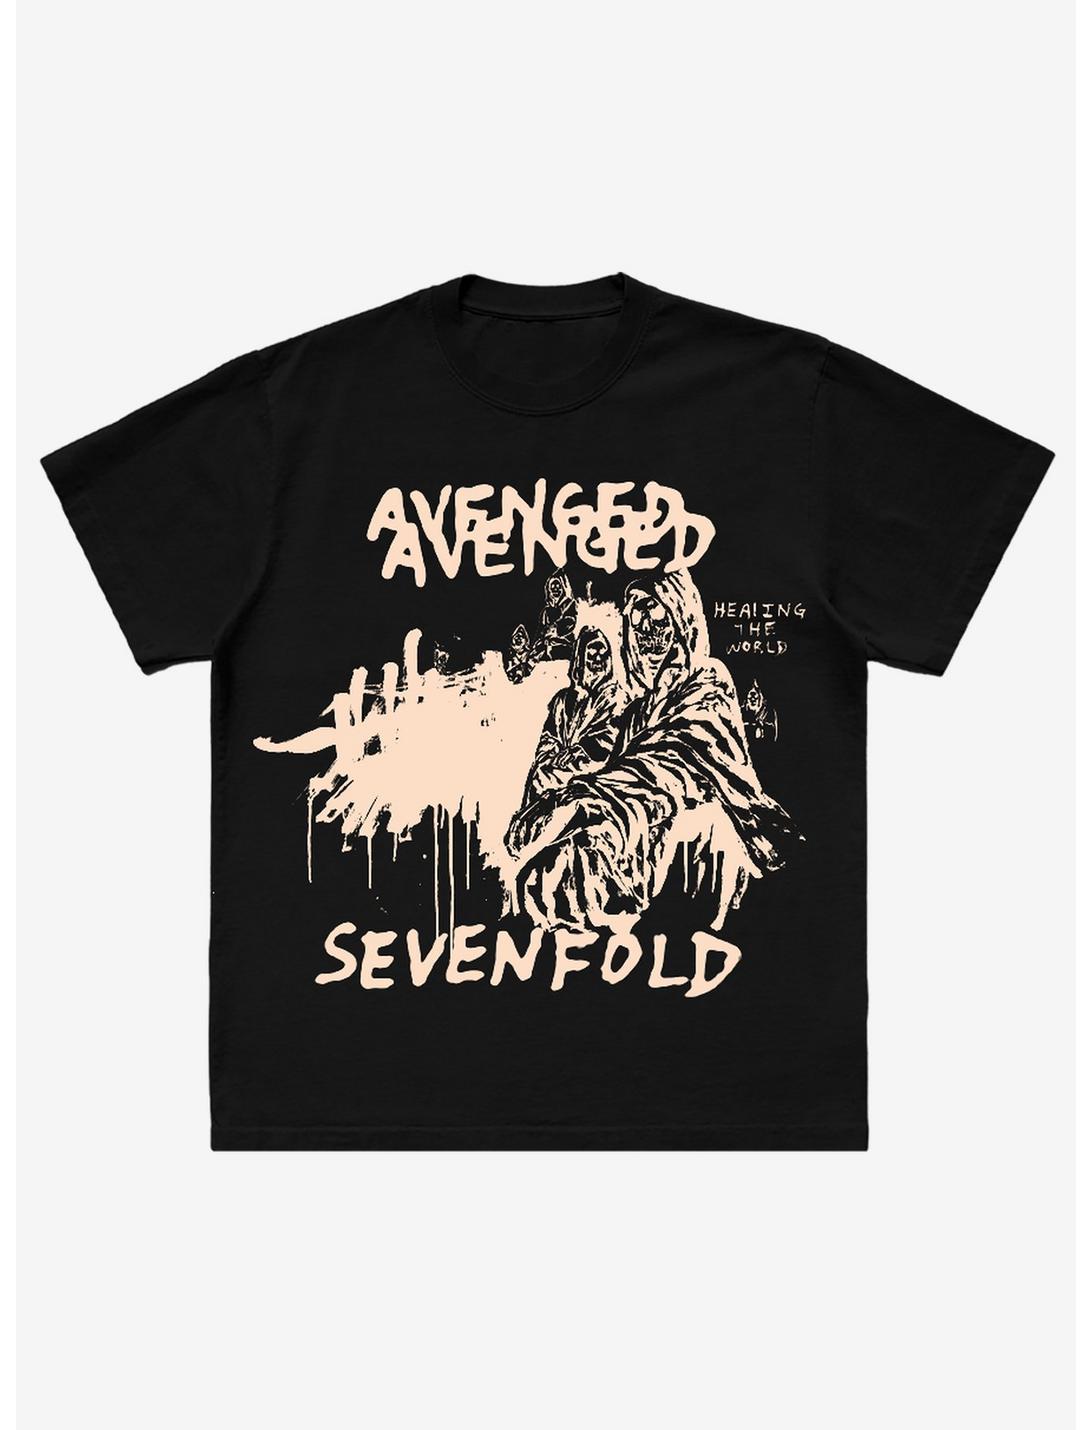 Avenged Sevenfold Life Is But A Dream Healing The World T-Shirt | Hot Topic